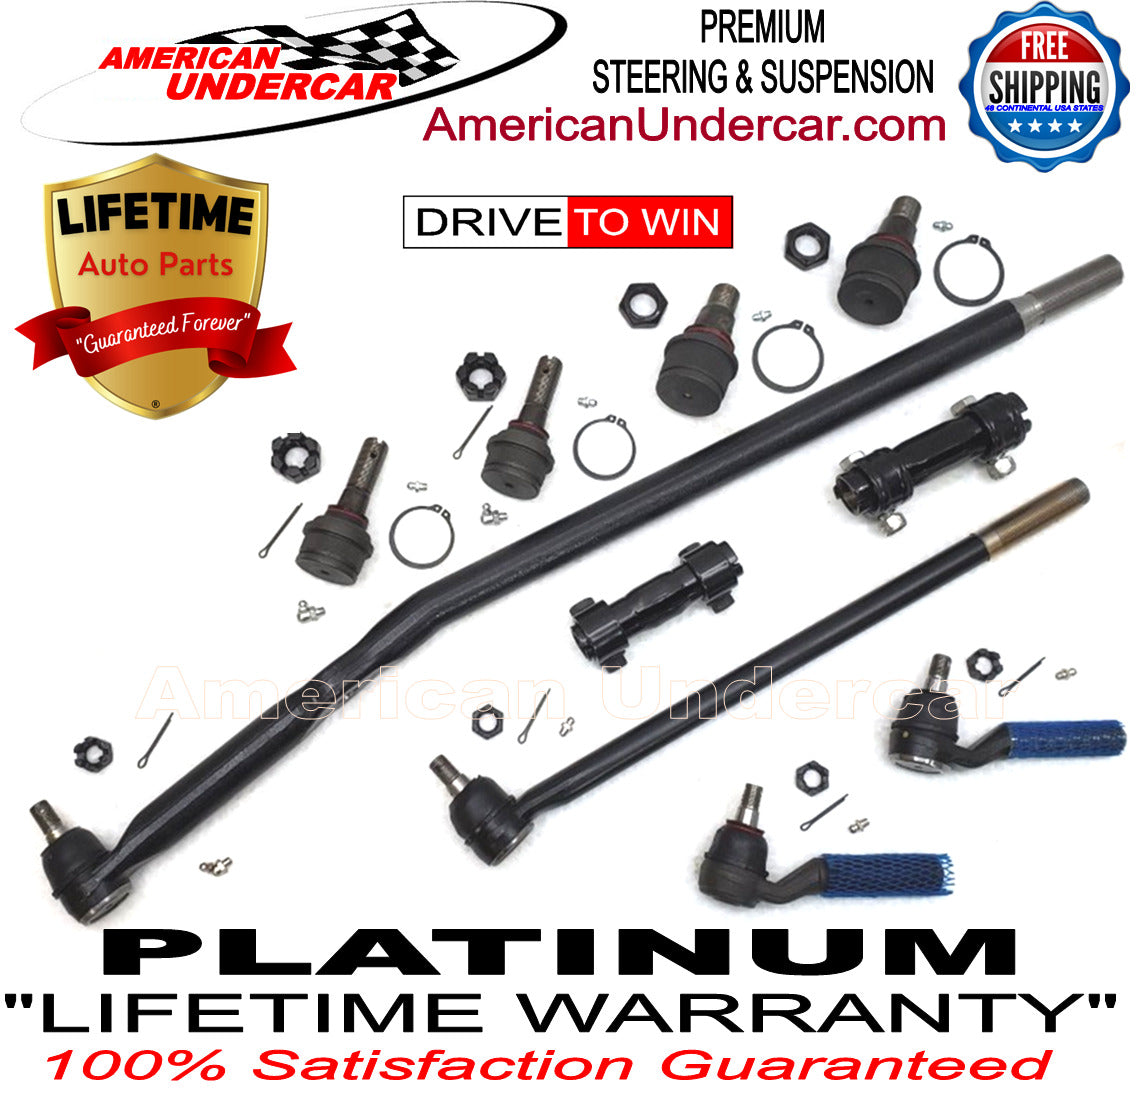 Lifetime Ball Joint Tie Rod Drag Link Steering Kit for 1995-1996 Ford F250 4x4